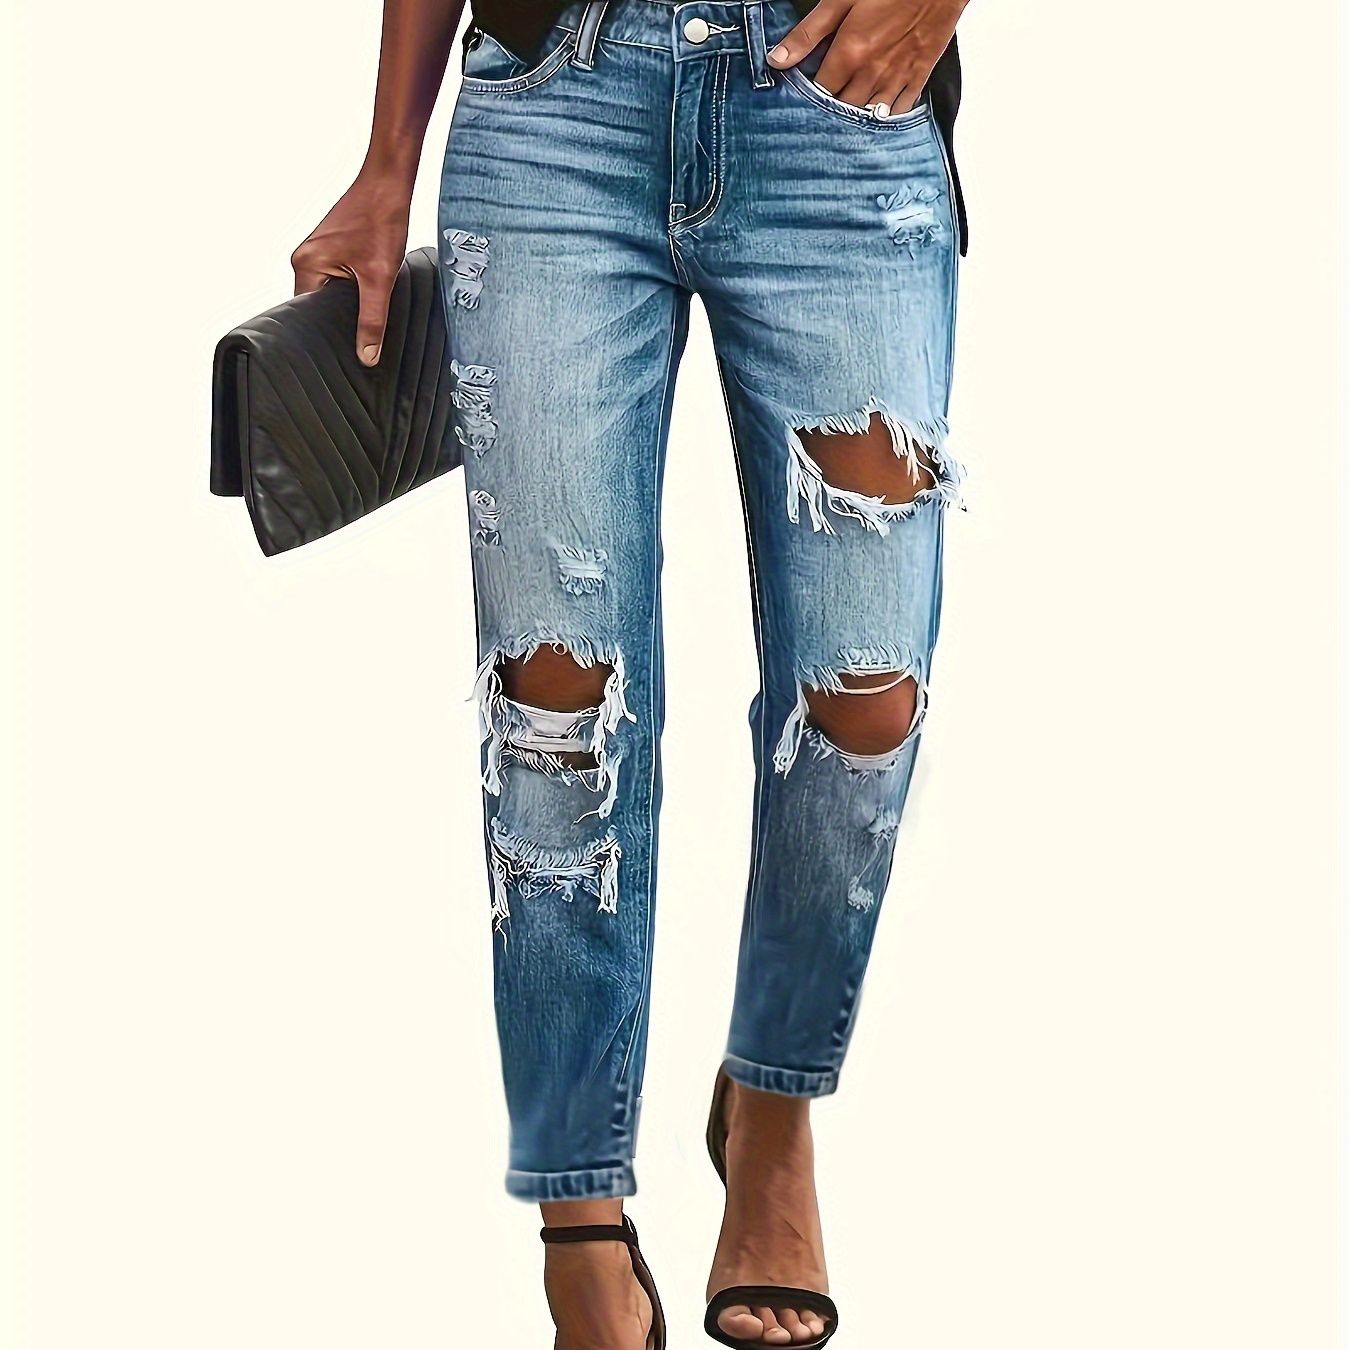 

Women's Ripped Skinny Jeans, Distressed Blue Denim, Street Style Fashion, Washed Long Pants With Frayed Holes For Fall